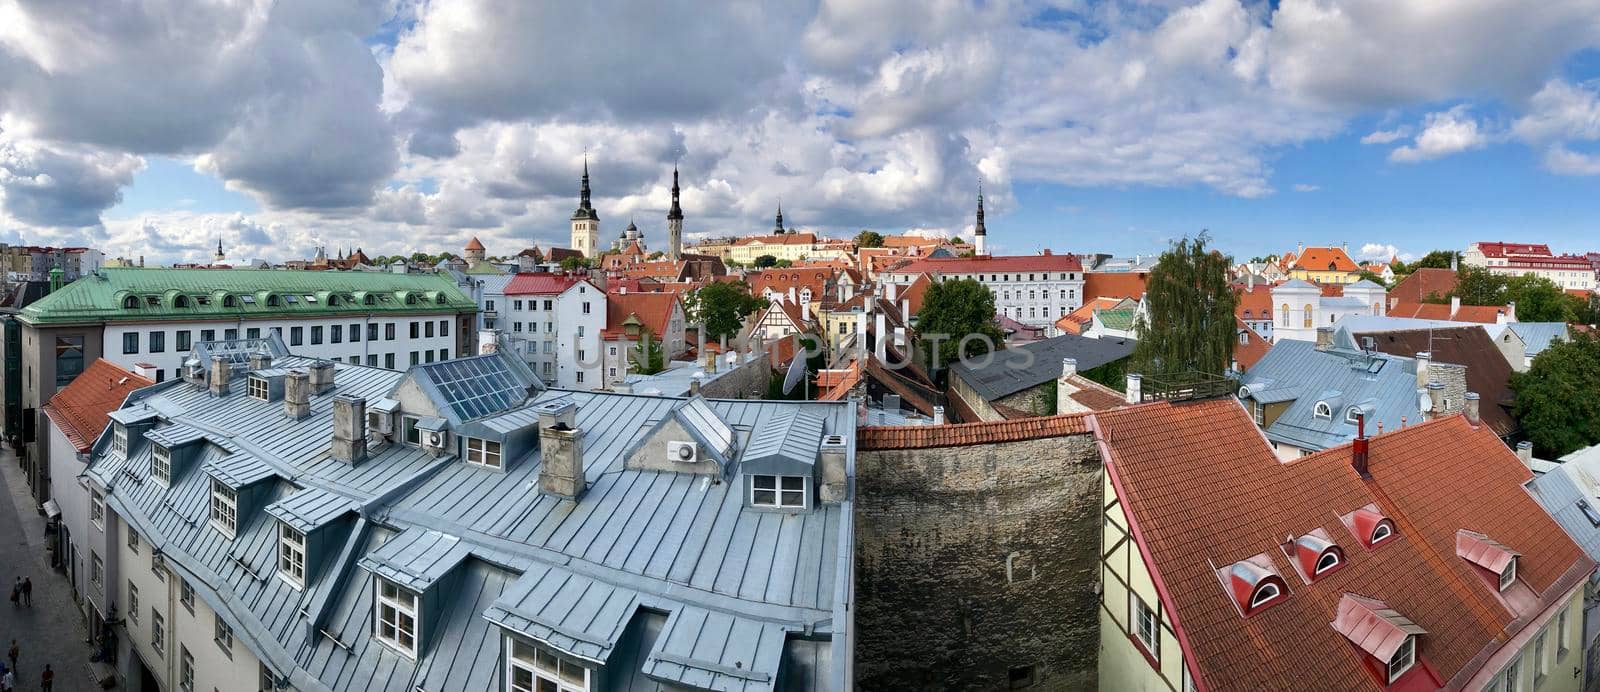 The walls and towers of Tallinn, Estonia. Cityscape panorama of Old Town with historical buildings. by apavlin